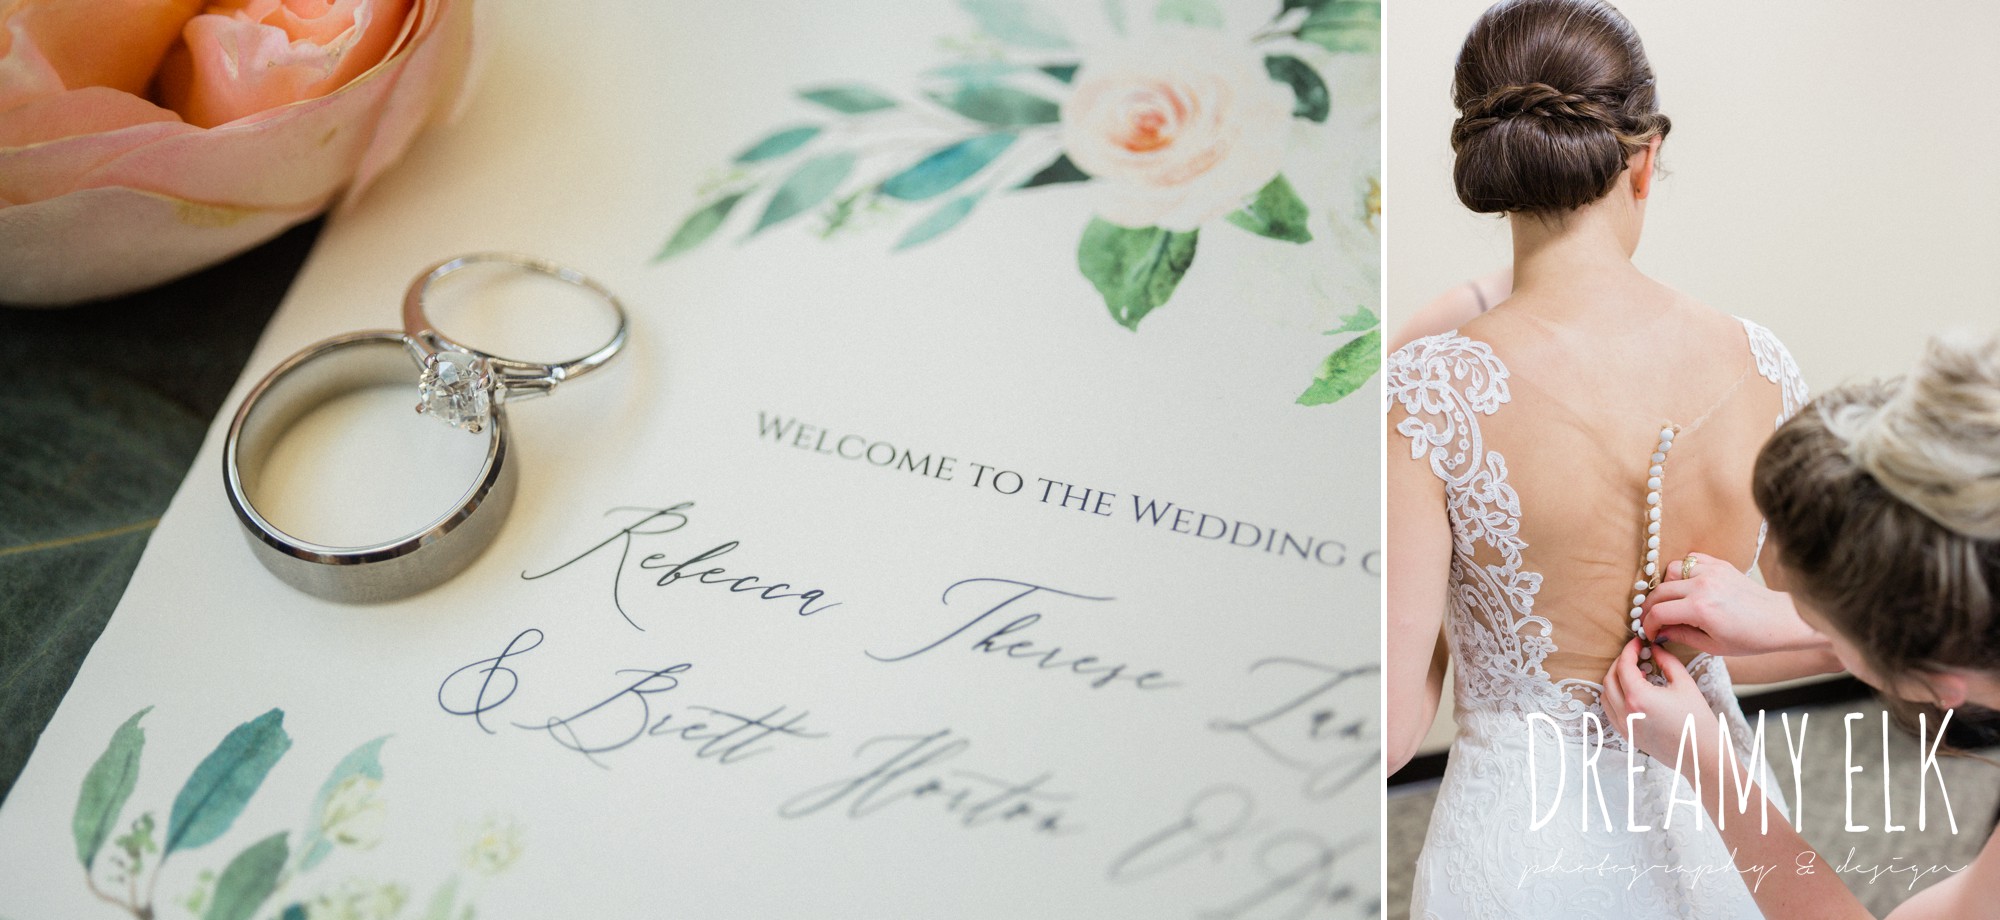 basic invite, wedding rings, bride getting dressed, spring wedding photo college station texas, dreamy elk photography and design